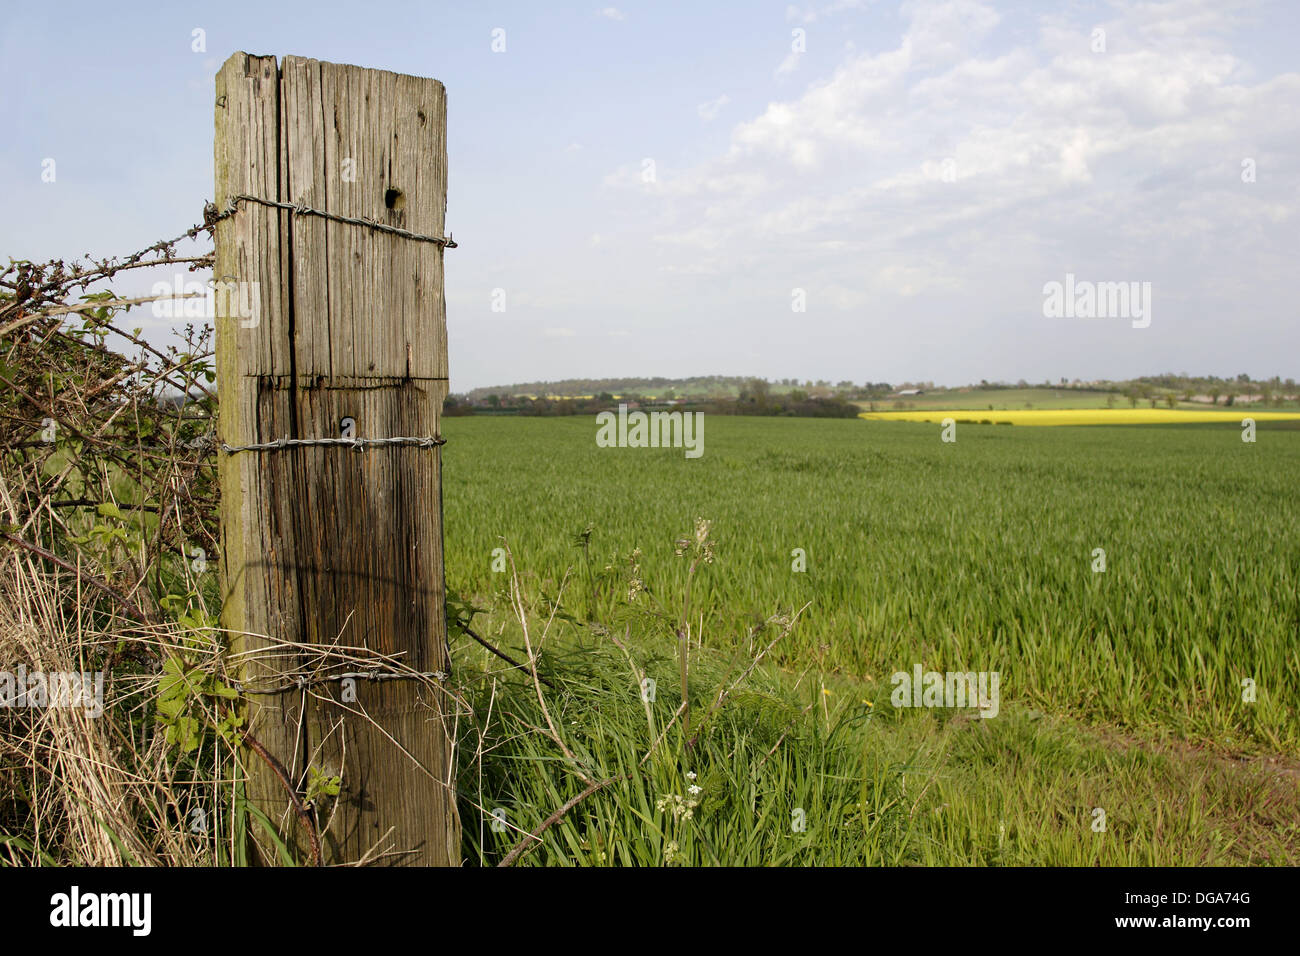 Old wooden fence post in field close up England UK Stock Photo